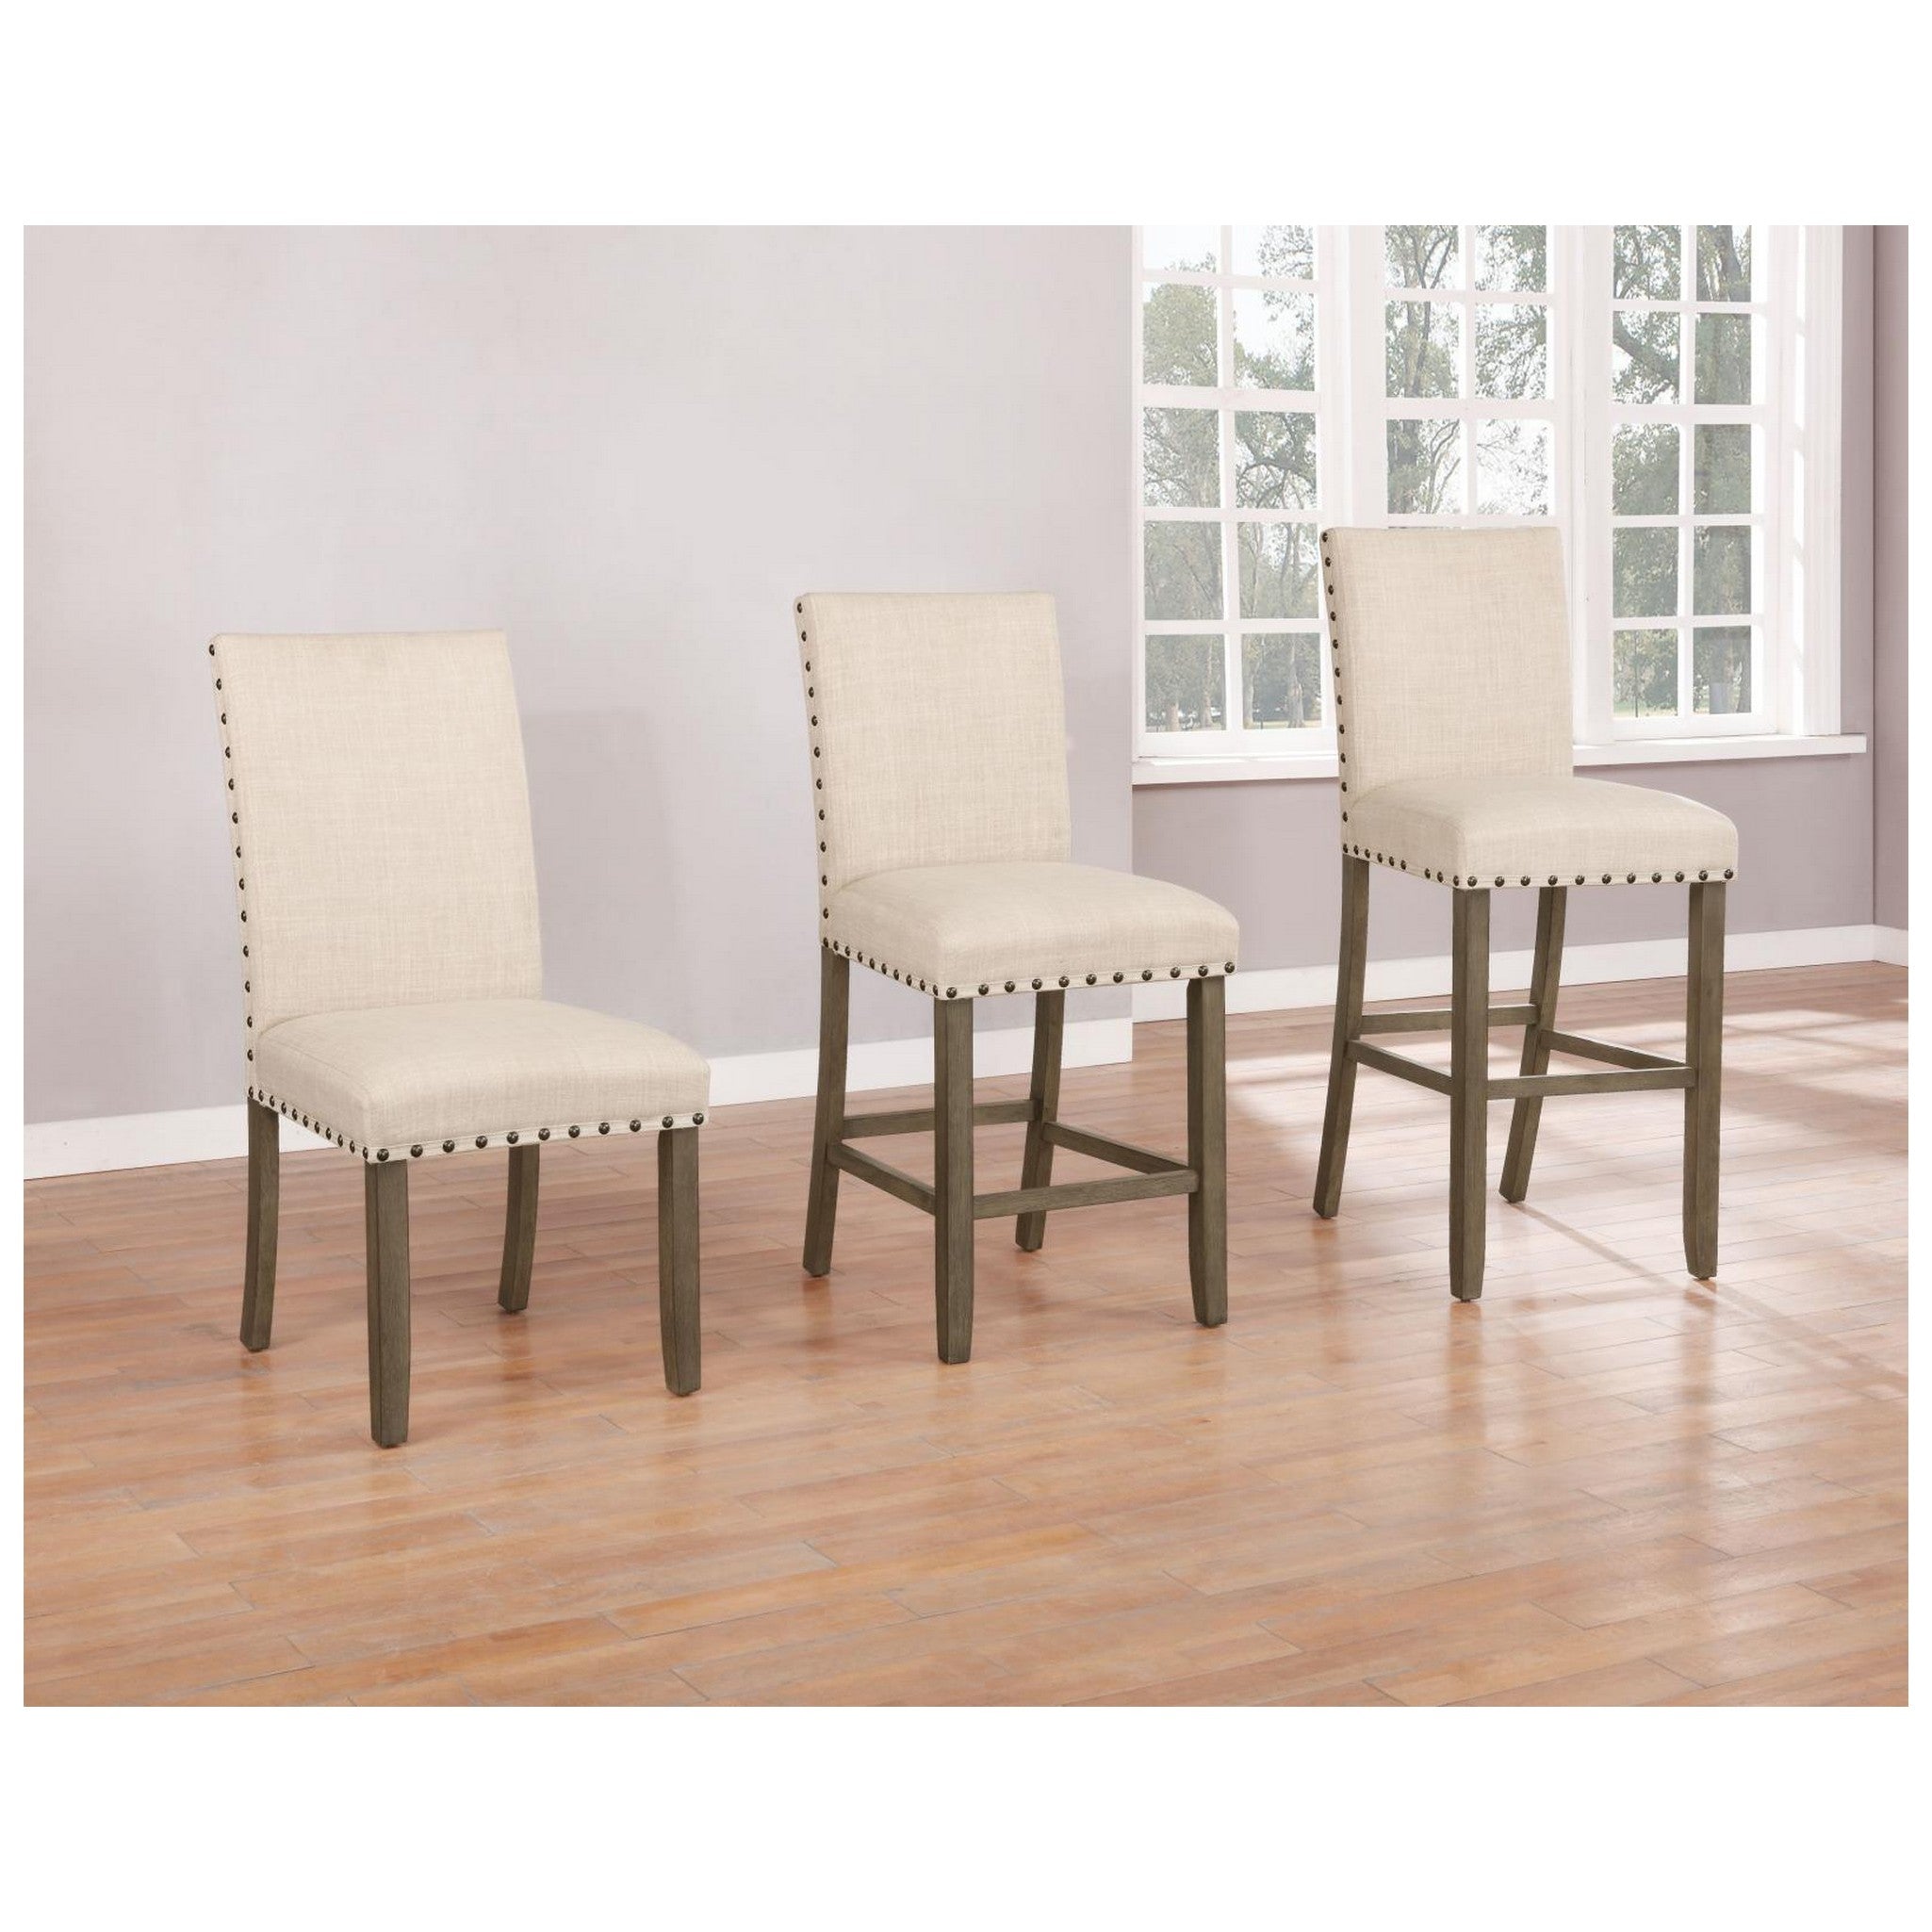 Ralland Upholstered Bar Stools with Nailhead Trim Beige (Set of 2) 193139